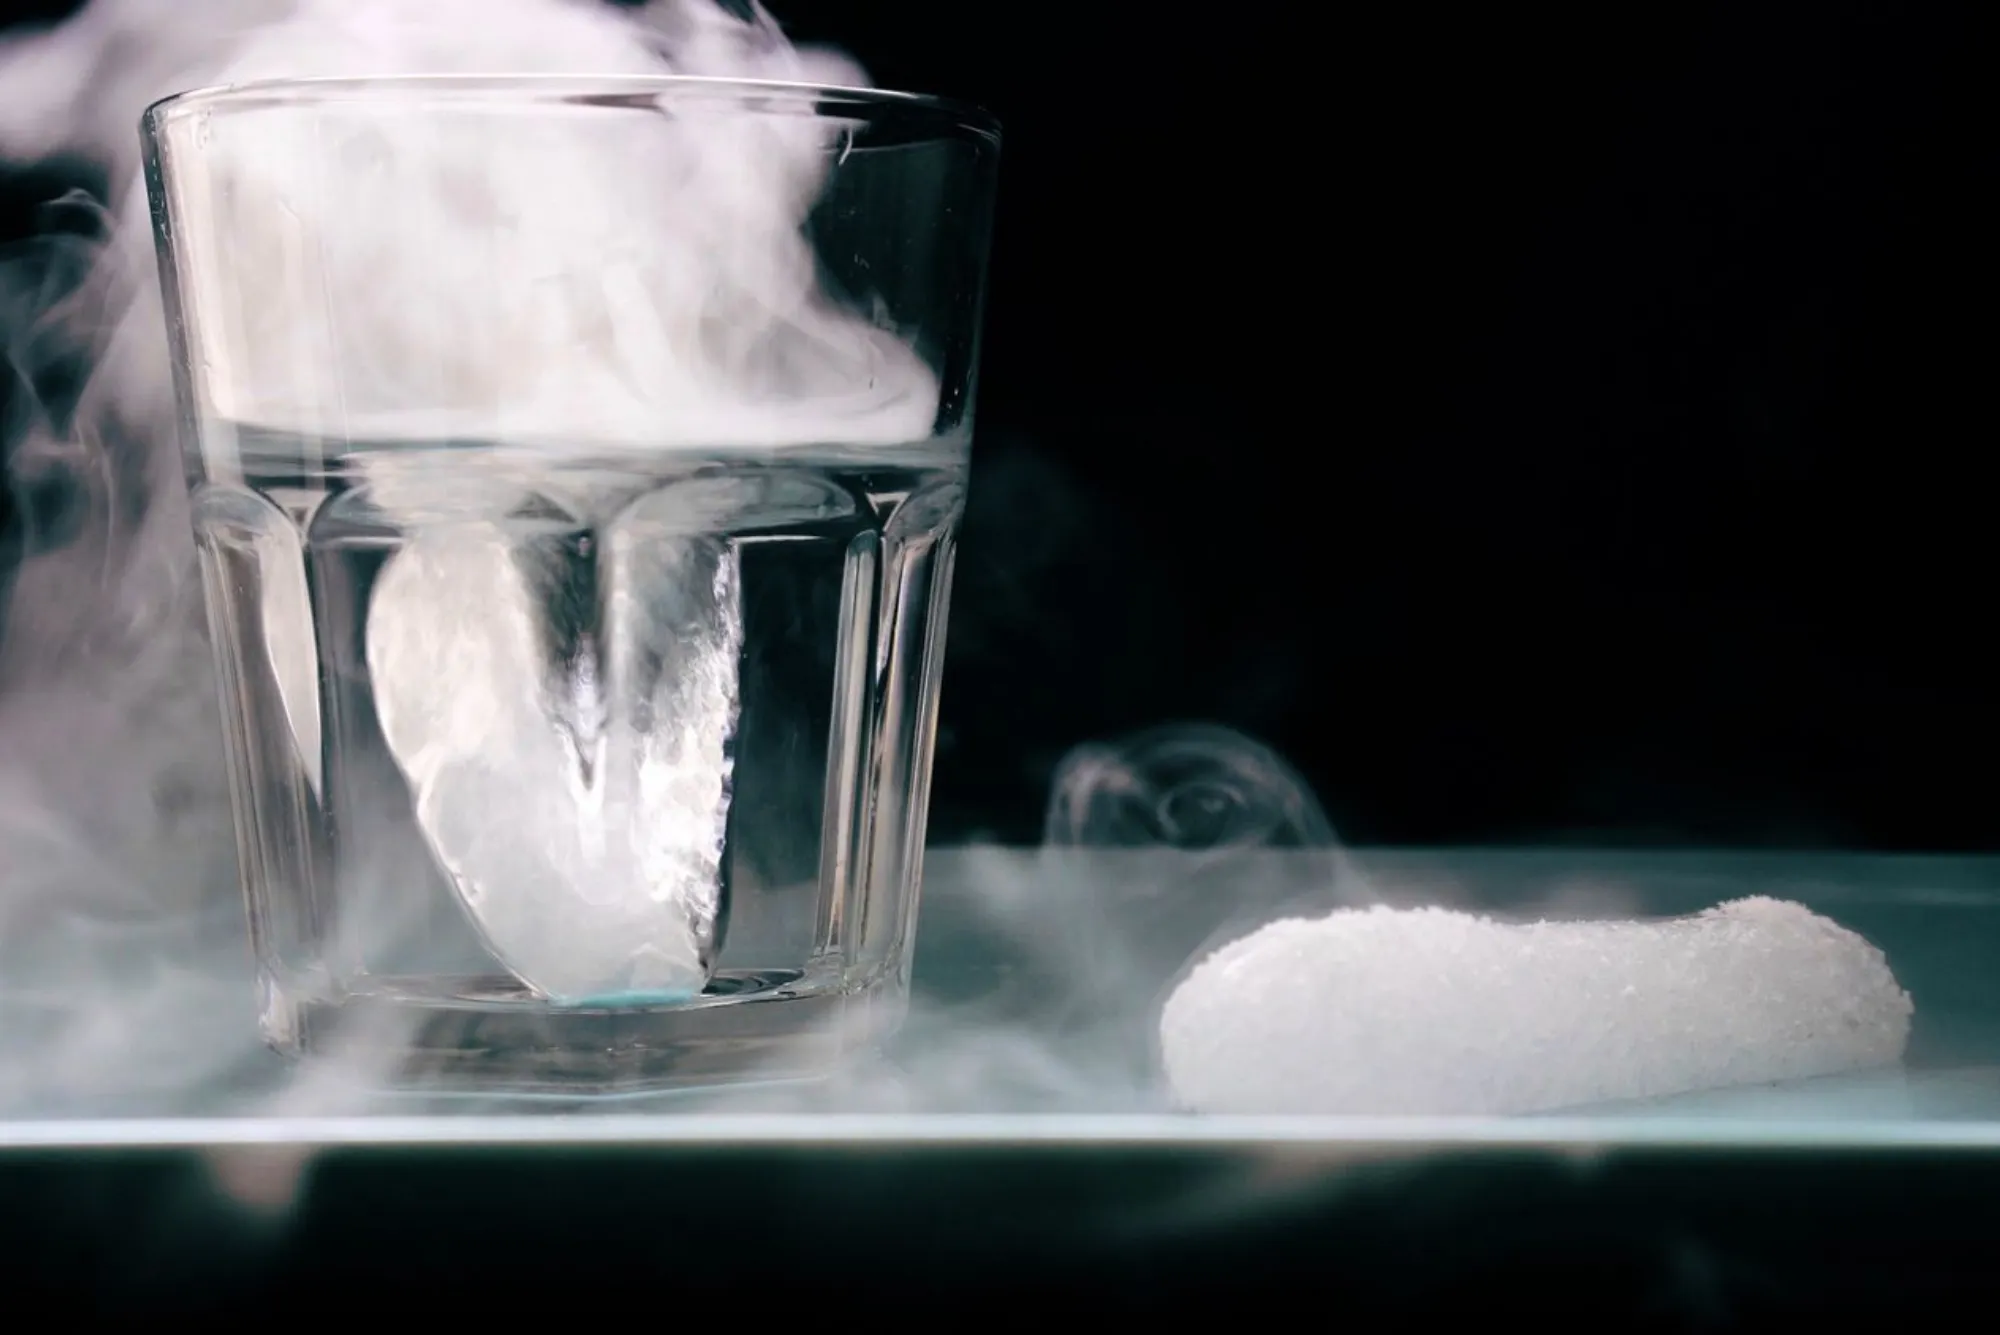 chemical compound that is dry ice in condensed form